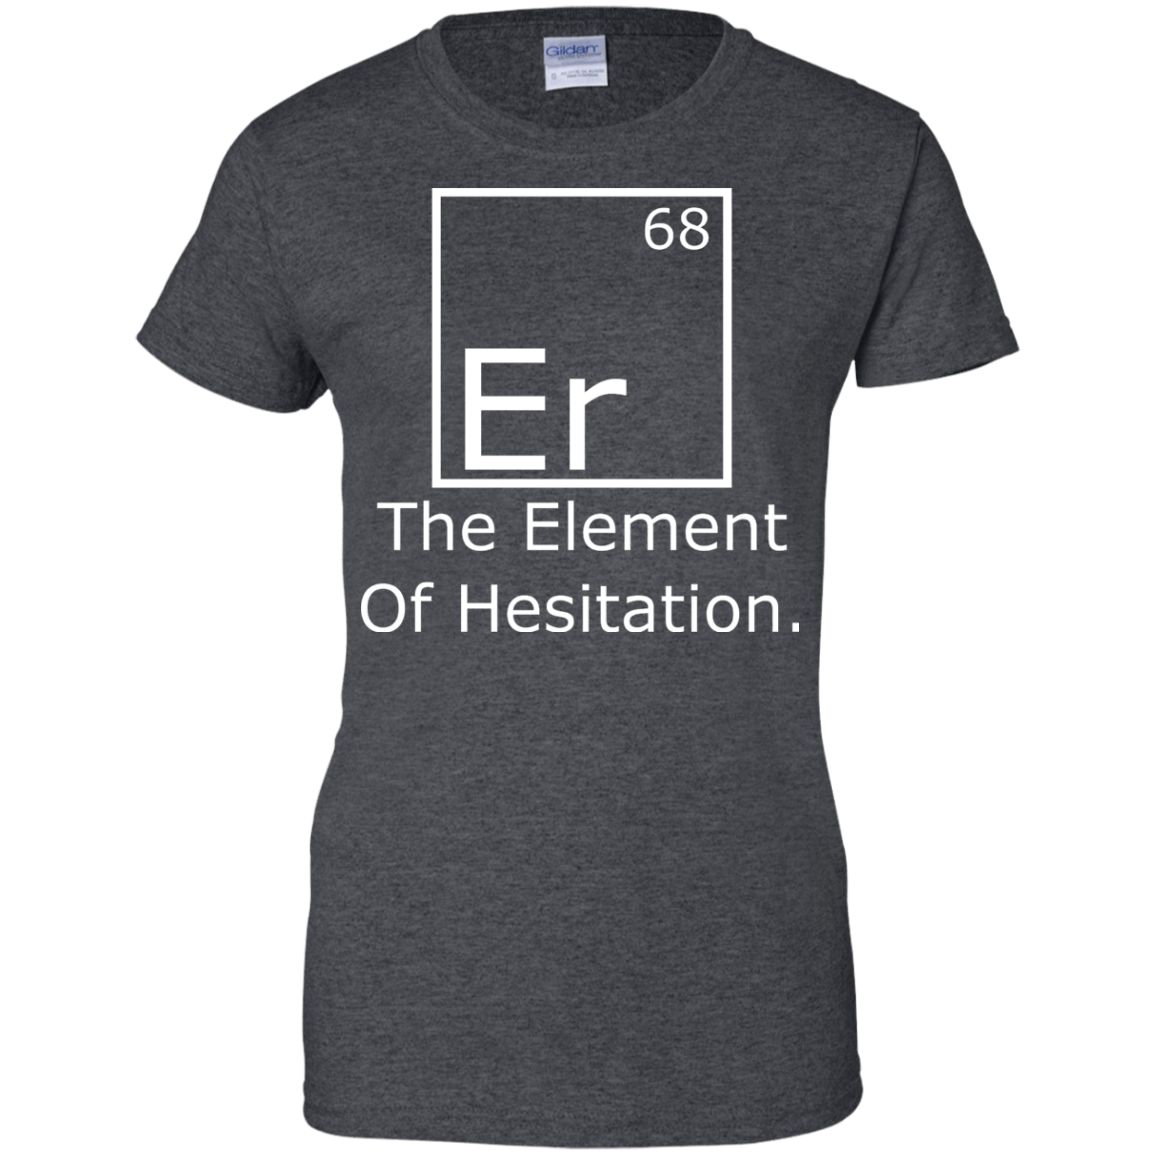 Er - The Element of Hesitation - Engineering Outfitters